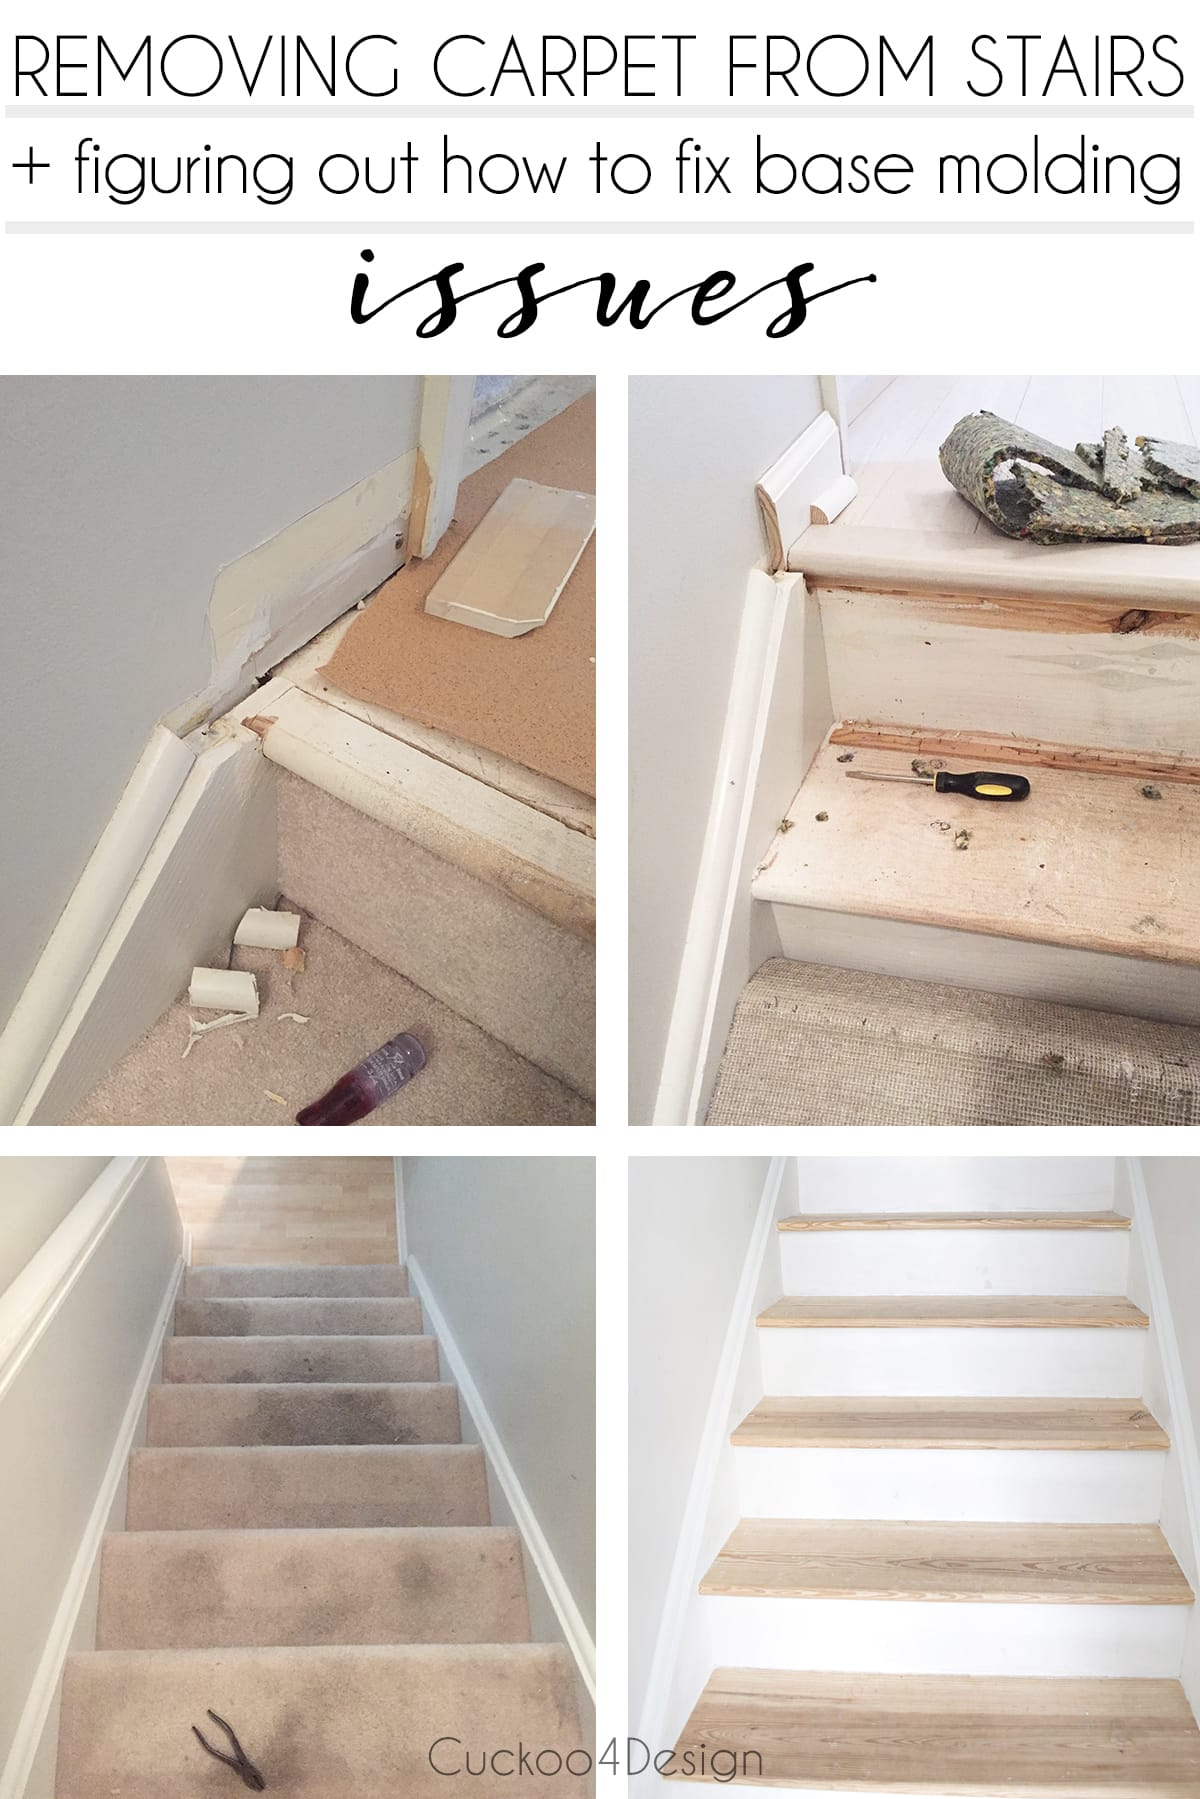 Removing Carpet from Stairs - Cuckoo4Design